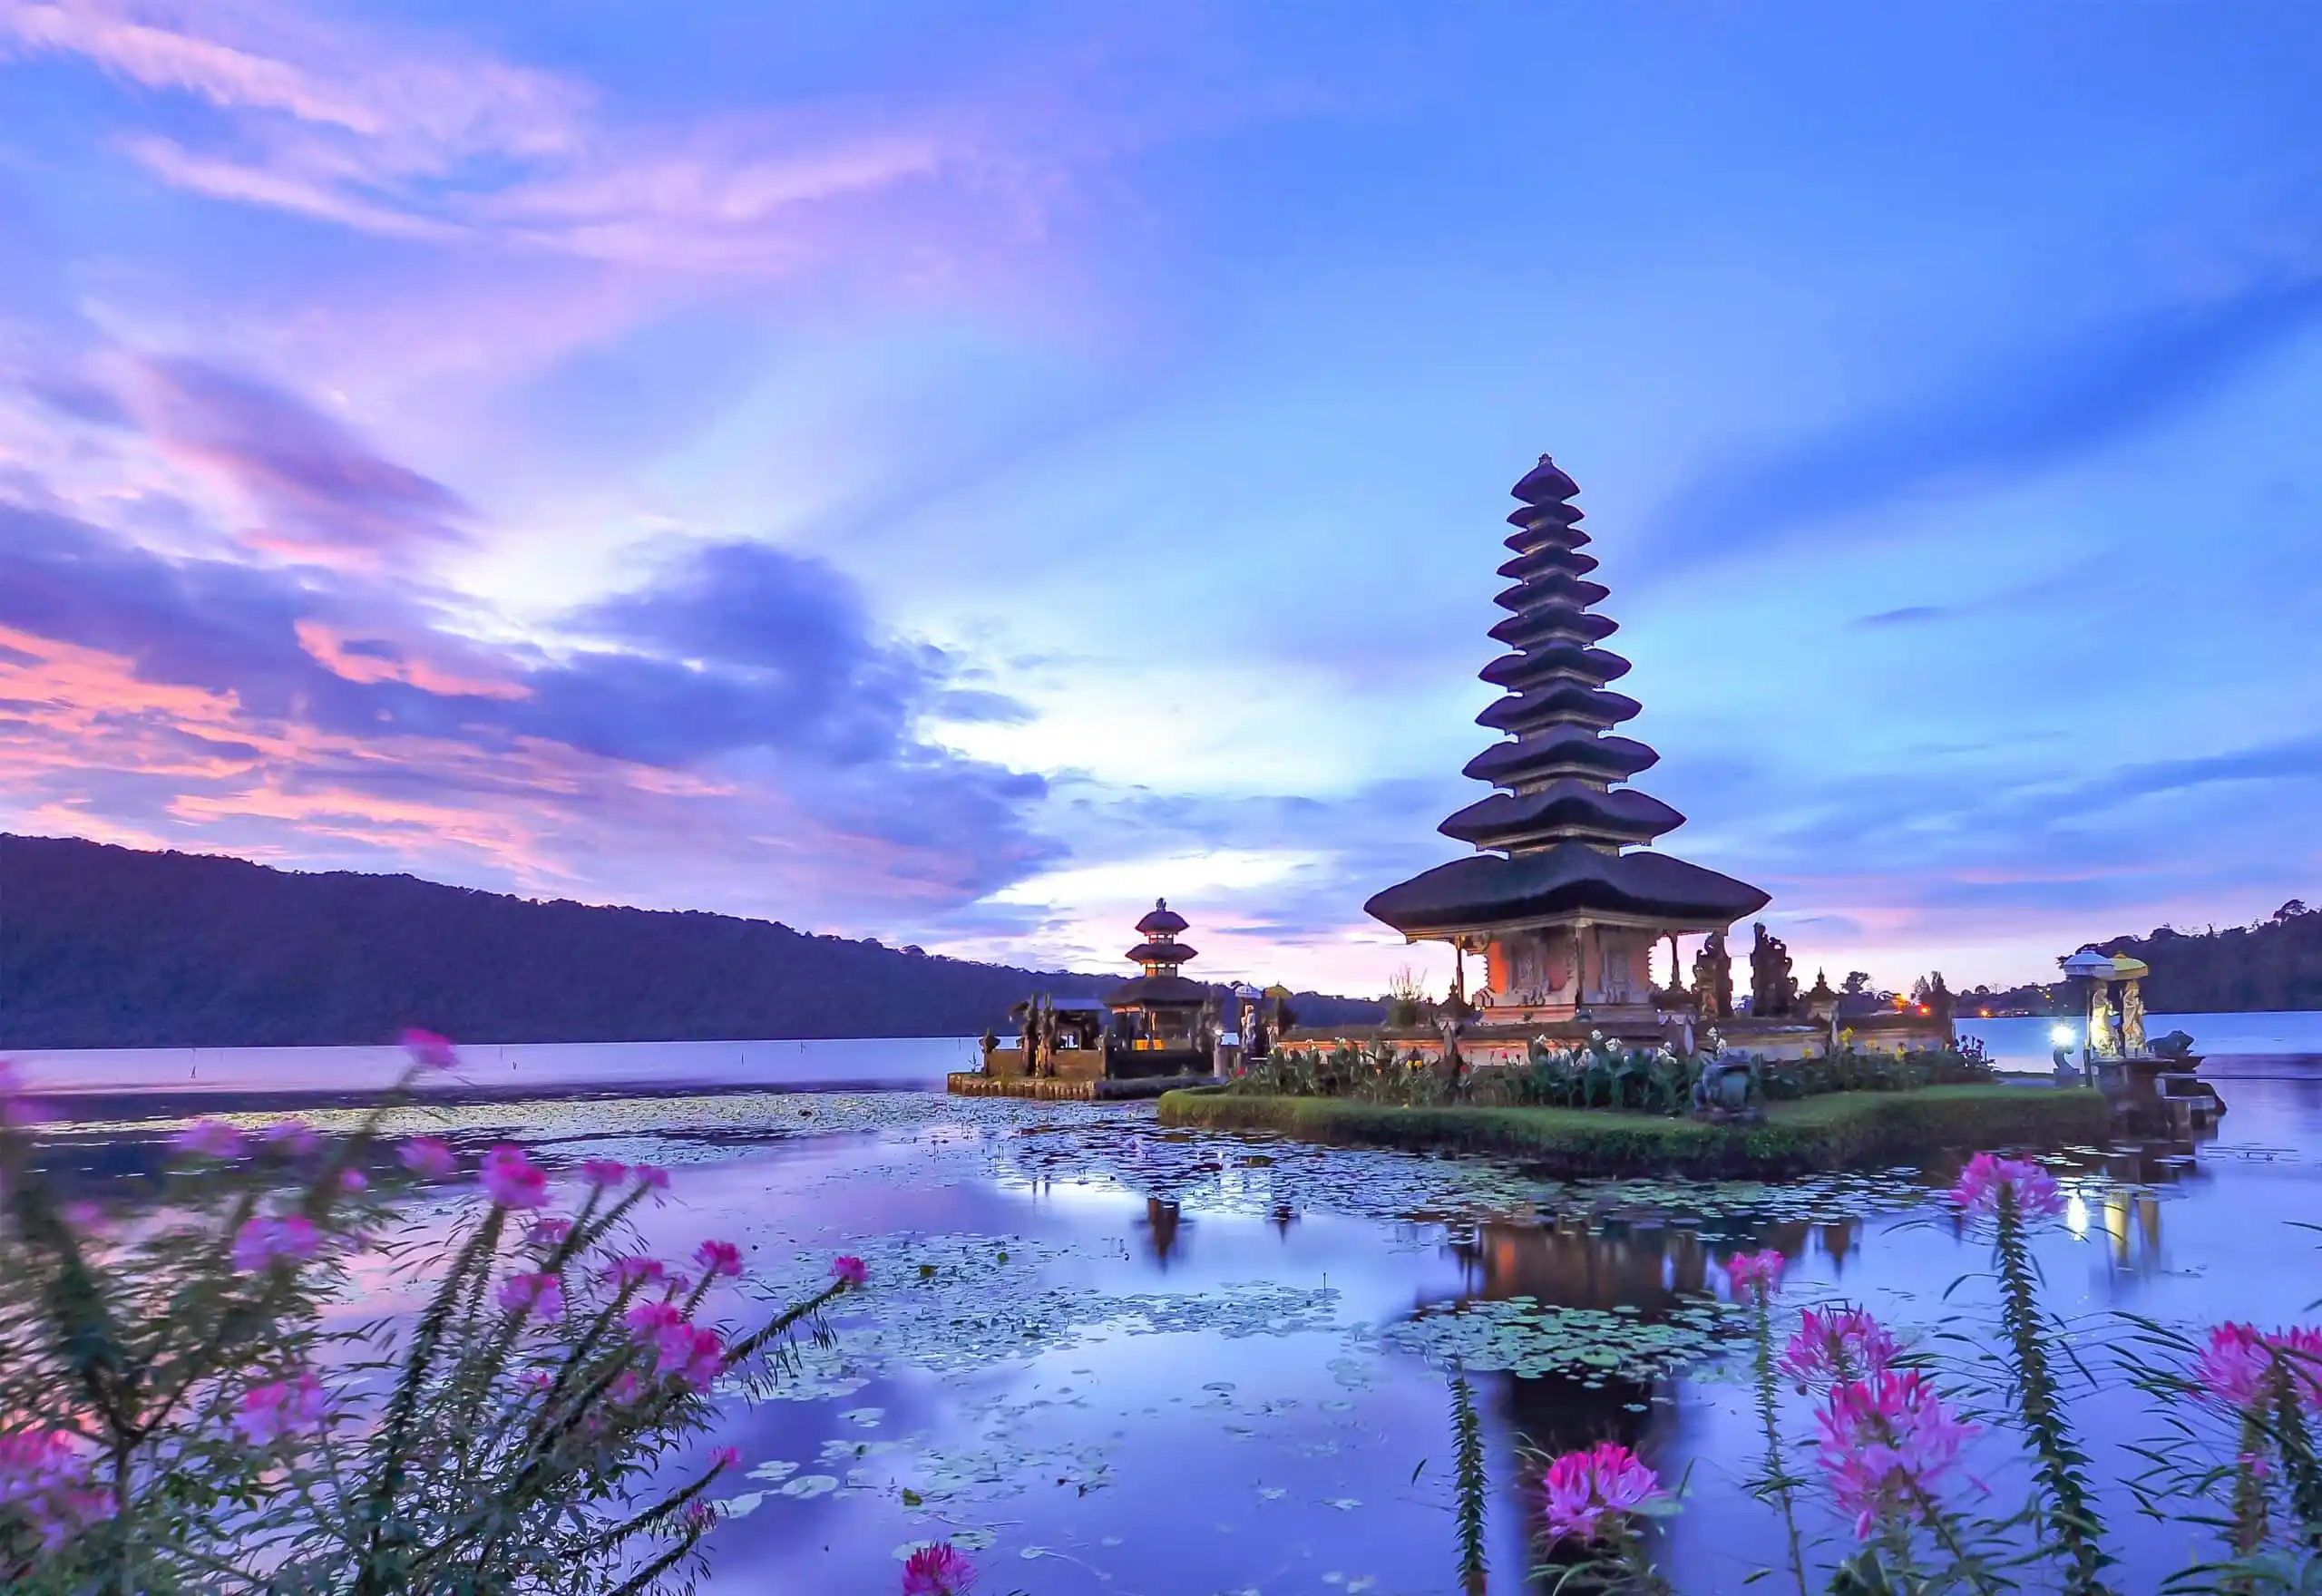 Human Resource Management Courses in Bali